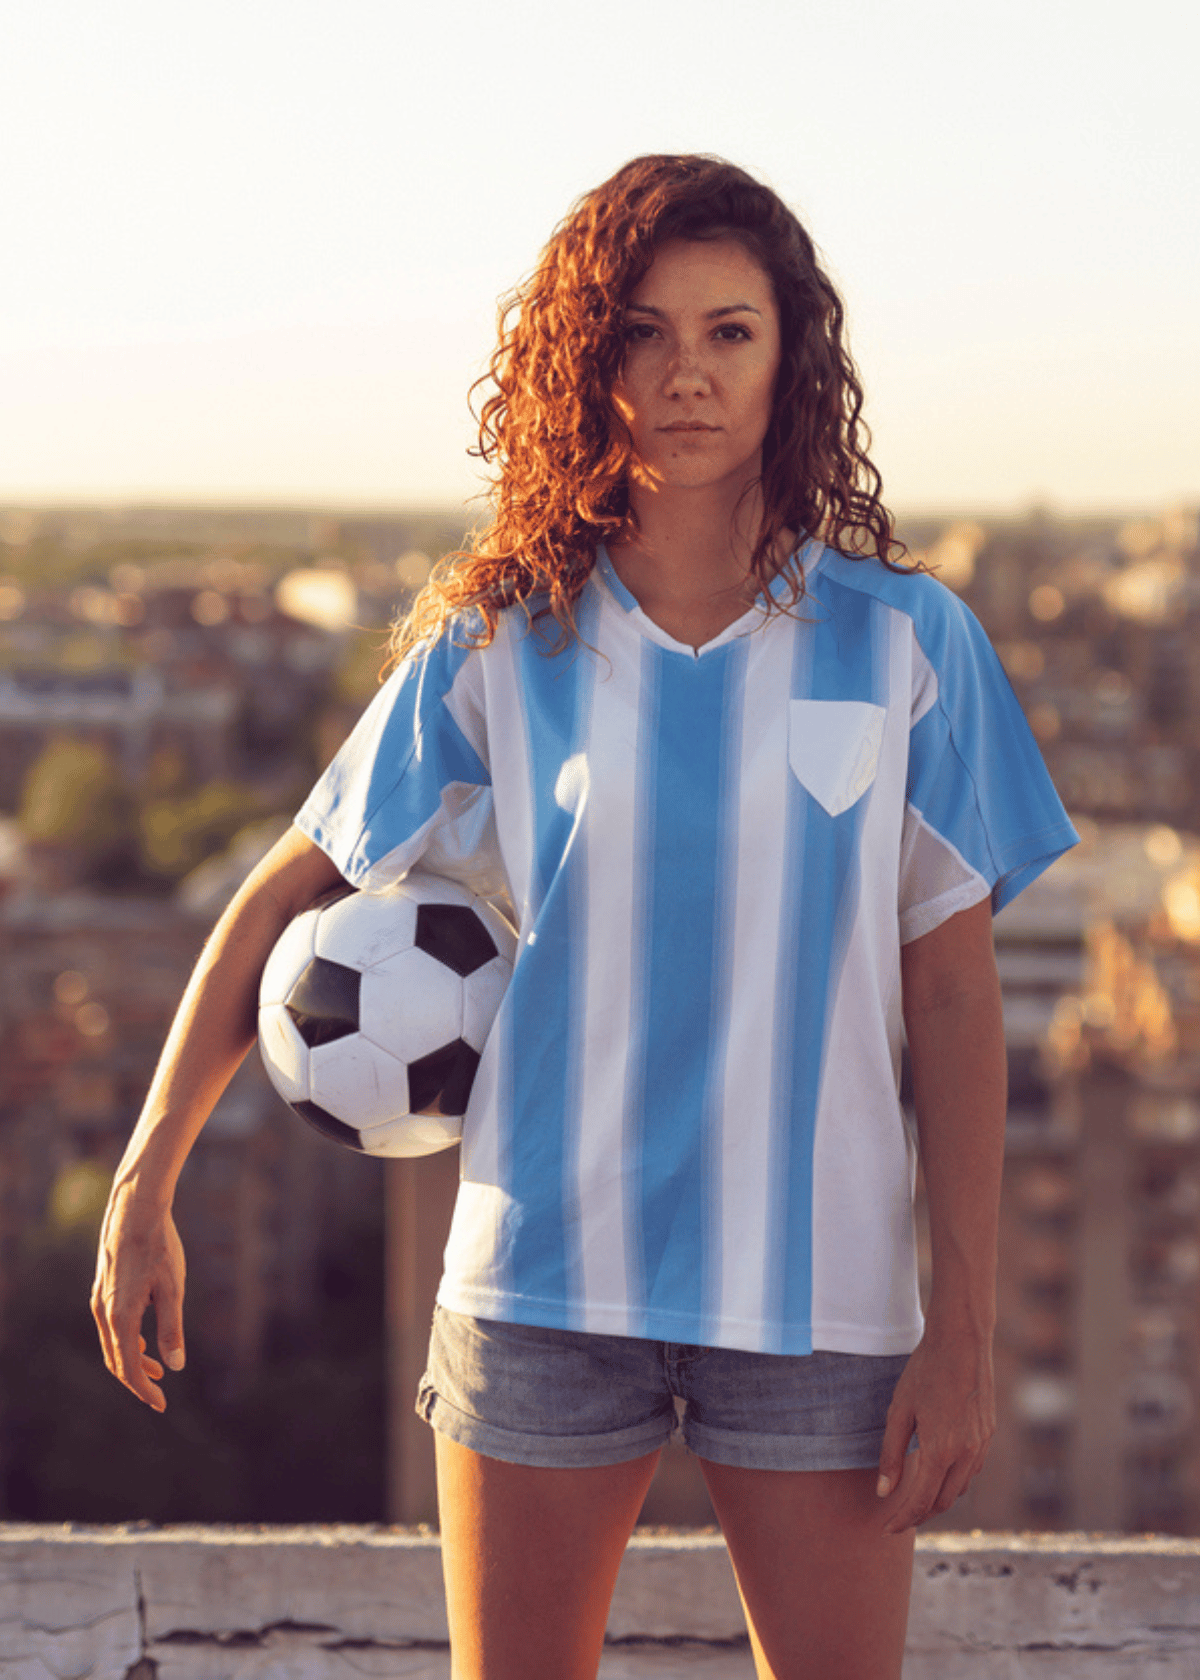 The Best Womens Soccer Jerseys for Performance and Style